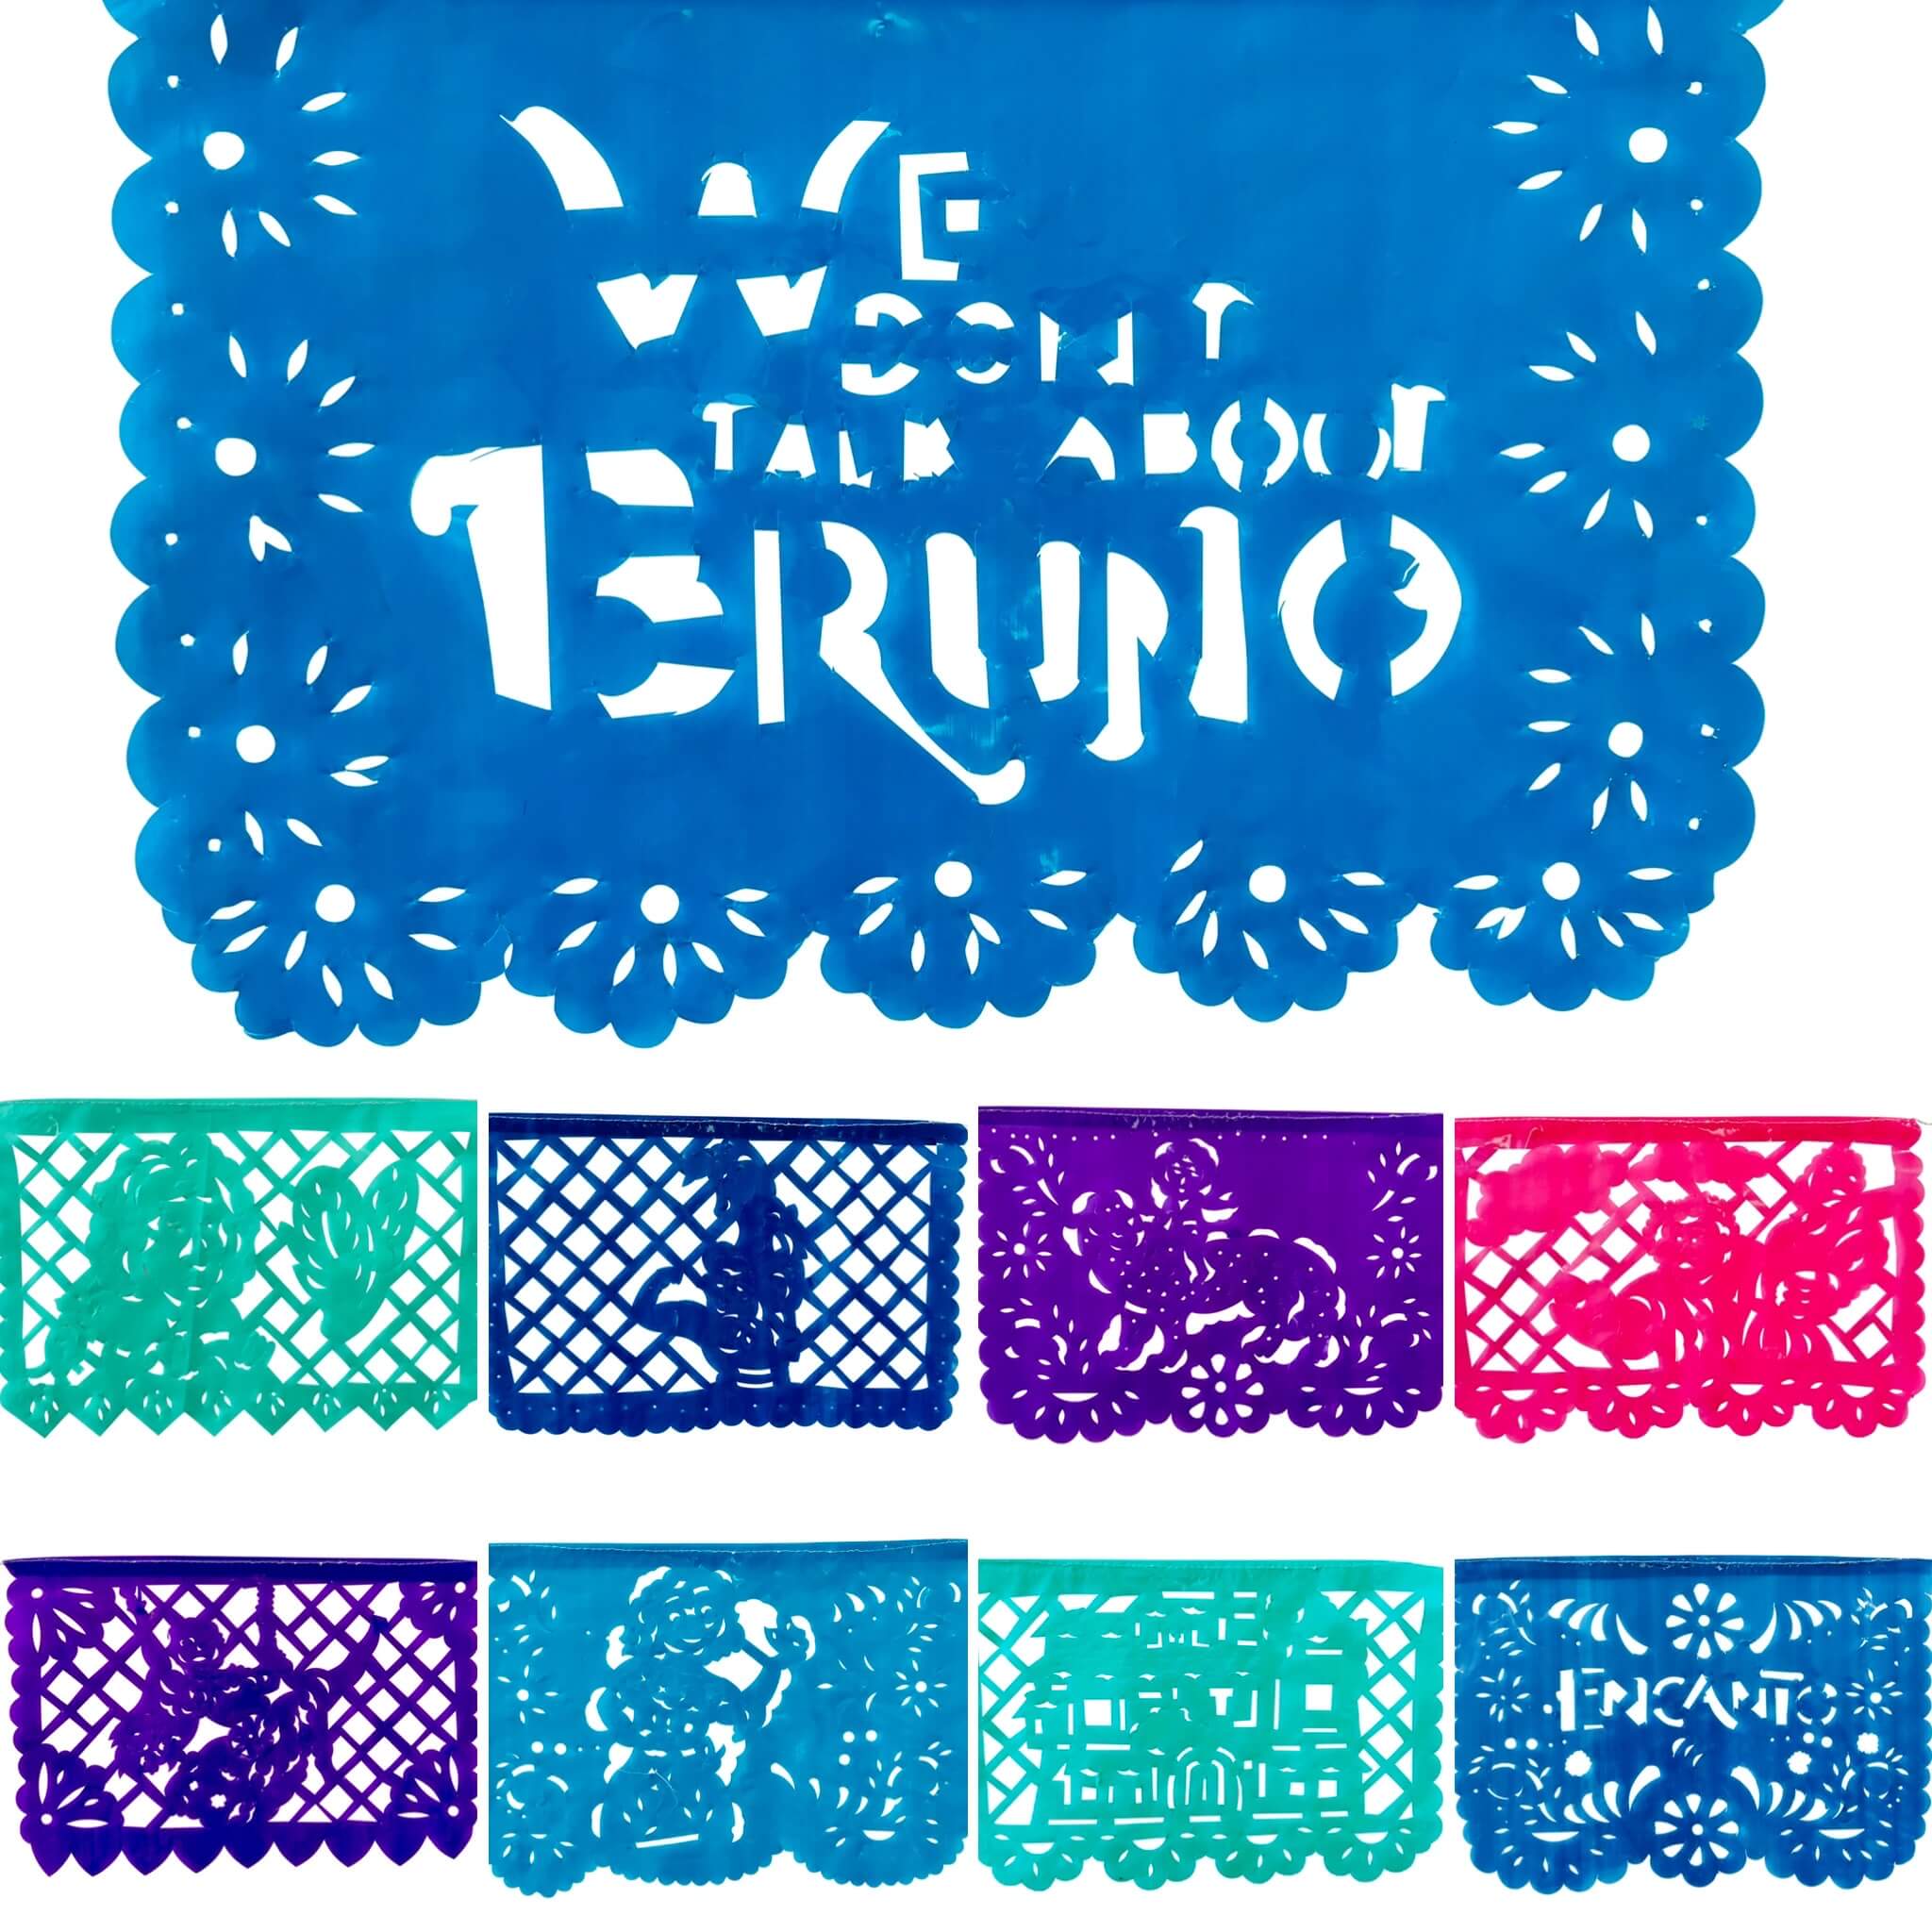 Encanto! Colombiana Fiesta PLASTIC Papel Picado Party Decorations- 4 Pack,  50 Feet Long! Scenes and Magic Doors!